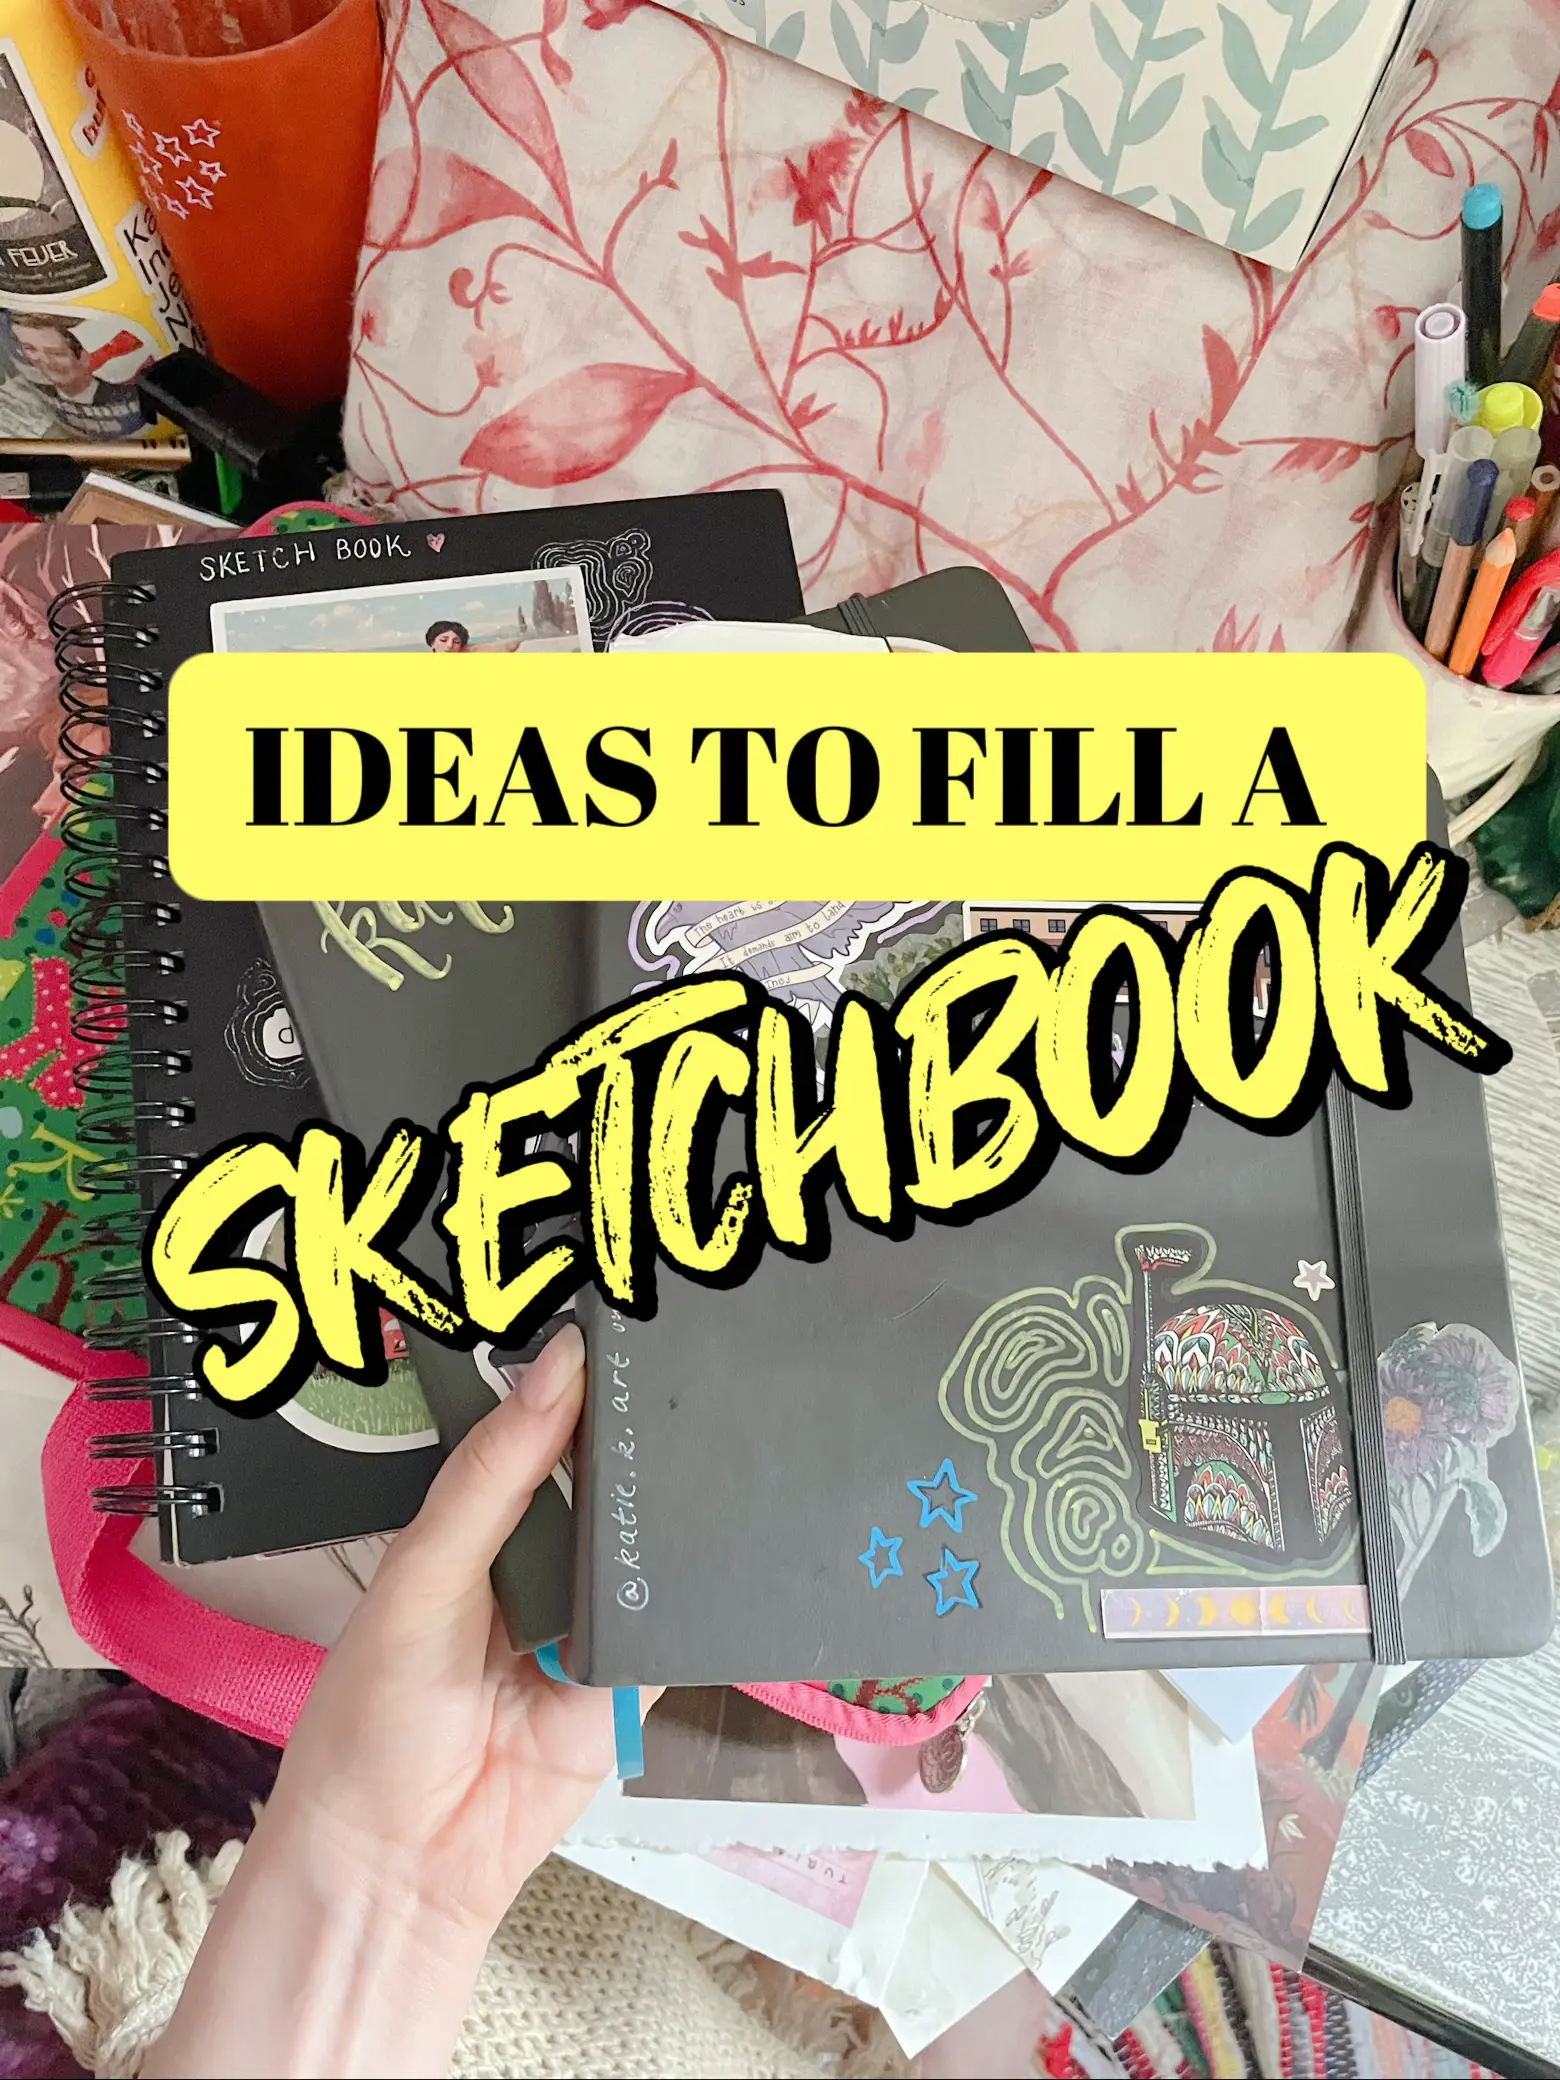 Draw with Me✍🏽💗, The Aesthetic Way to Fill Your Sketchbook